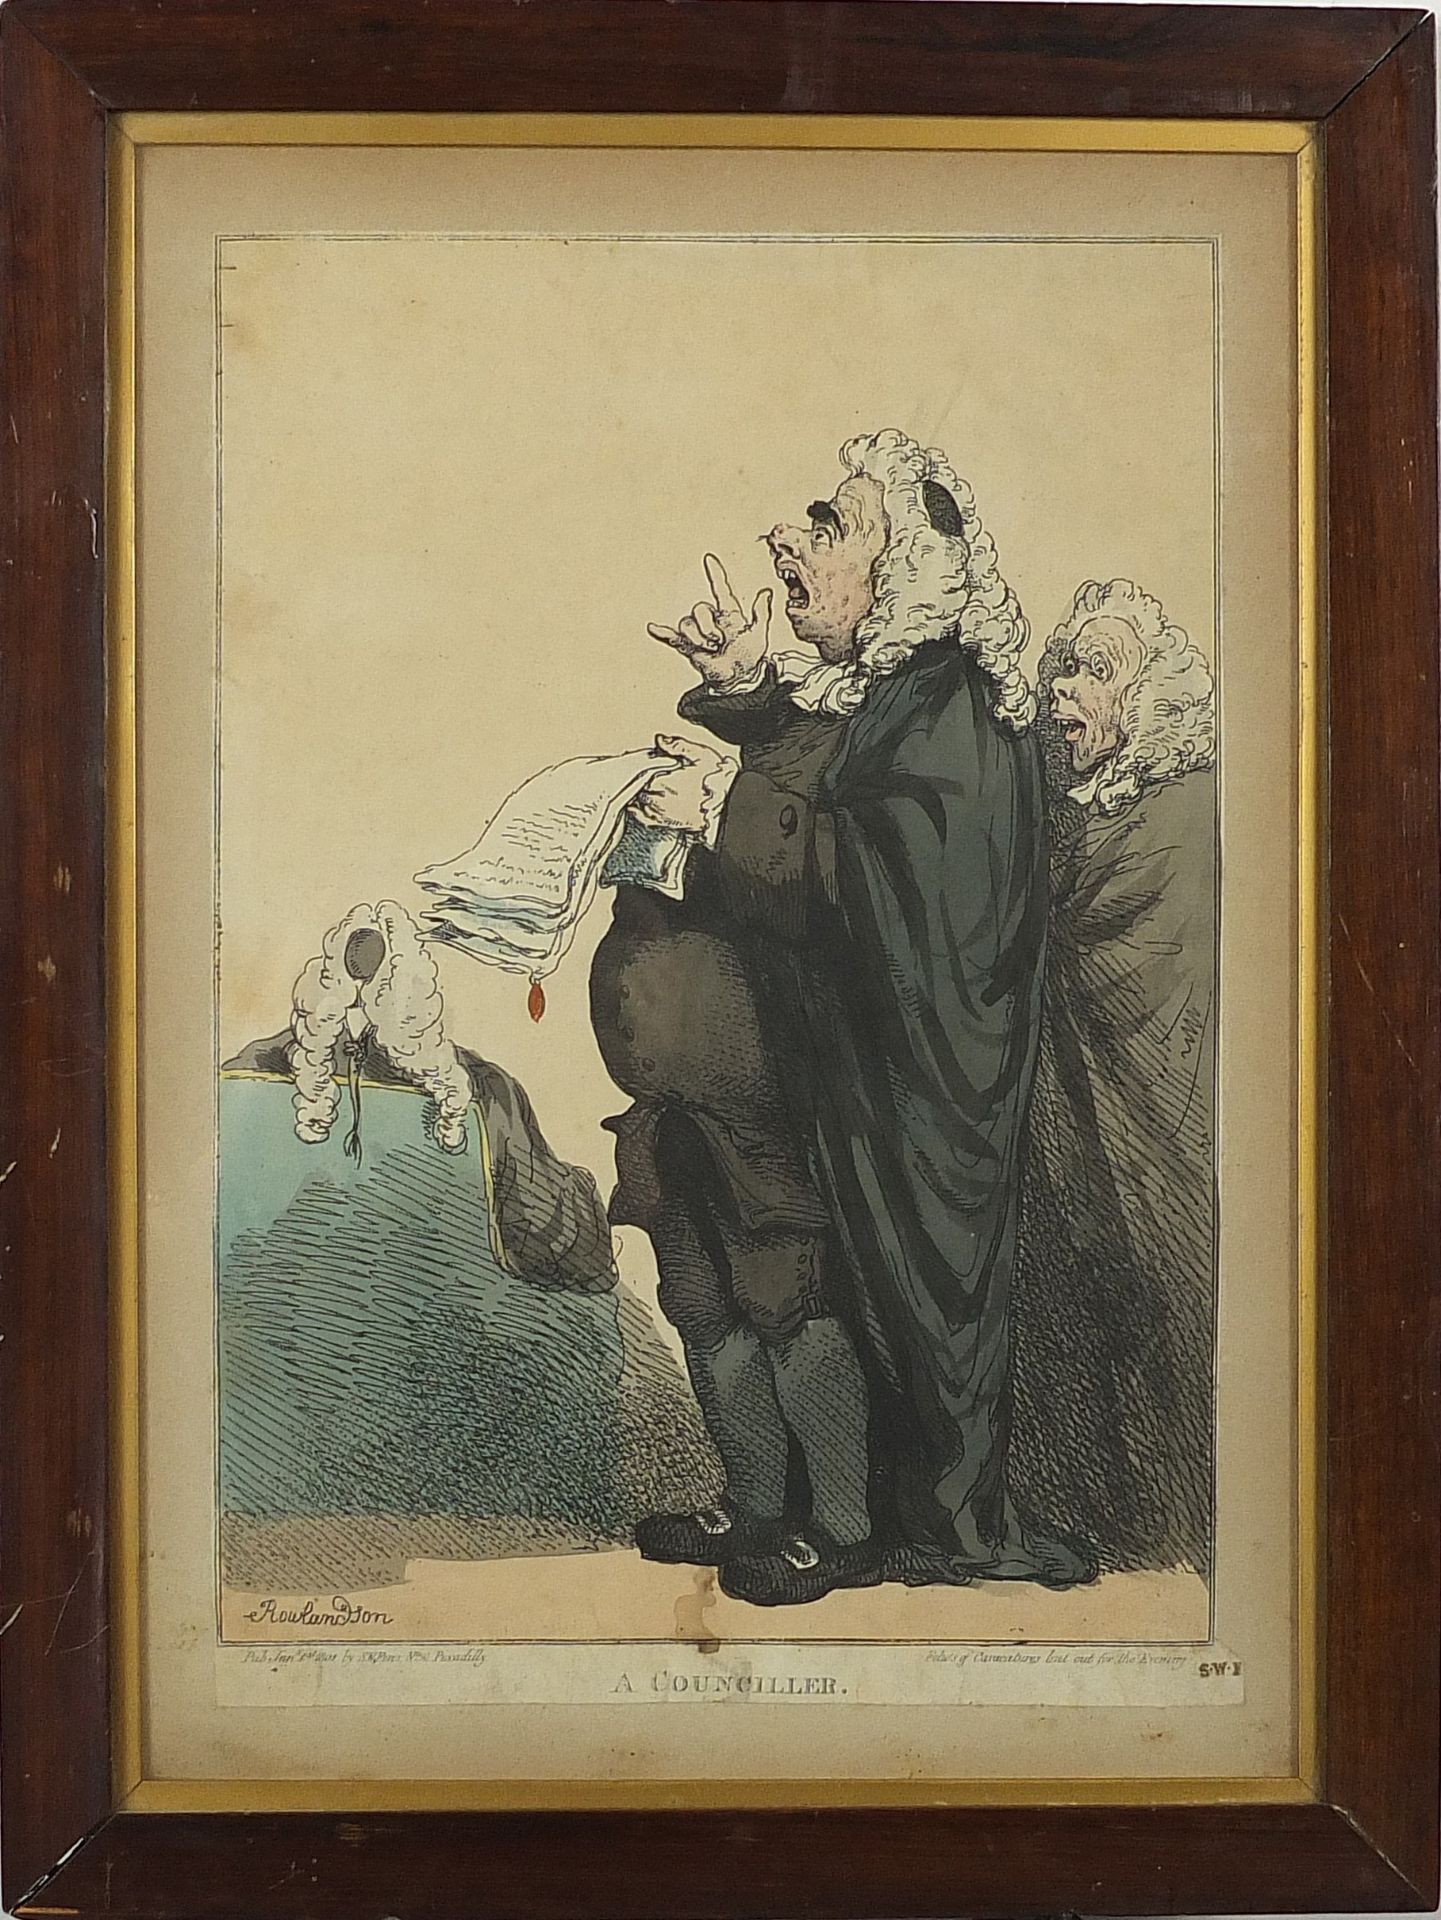 After Thomas Rowlandson - A Councillor and a Milksop, two early 19th century satirical prints in - Image 3 of 9